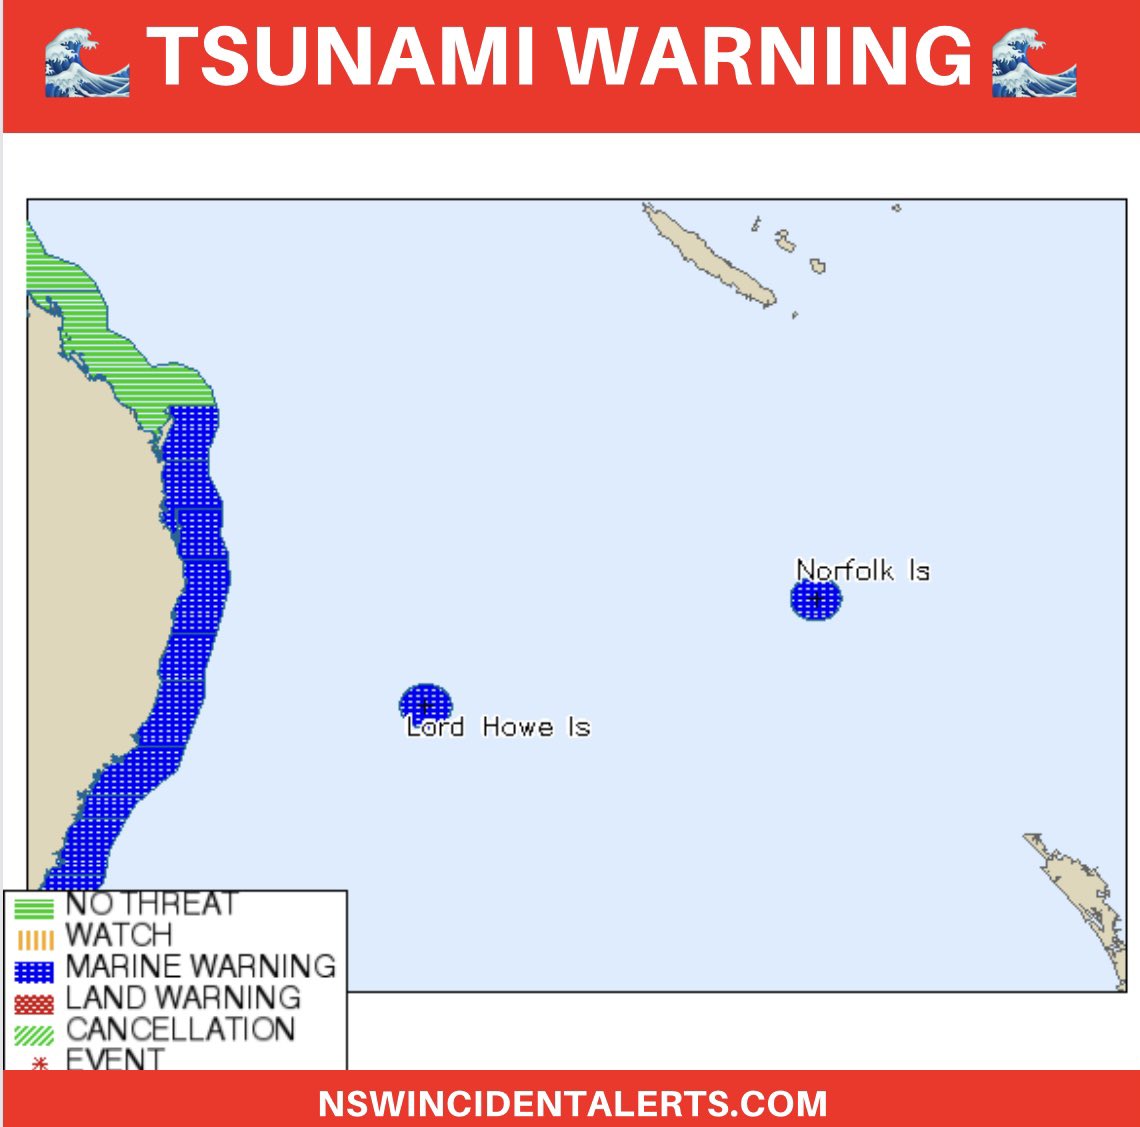 #Tsunami Update: Warnings downgrades for #NorfolkIsland and #LordHoweIsland. Unchanged for NSW.

🟦 Norfolk Island - Marine Threat
🟦 Lord Howe Island - Marine Threat
🟦 NSW Coast - Marine Threat